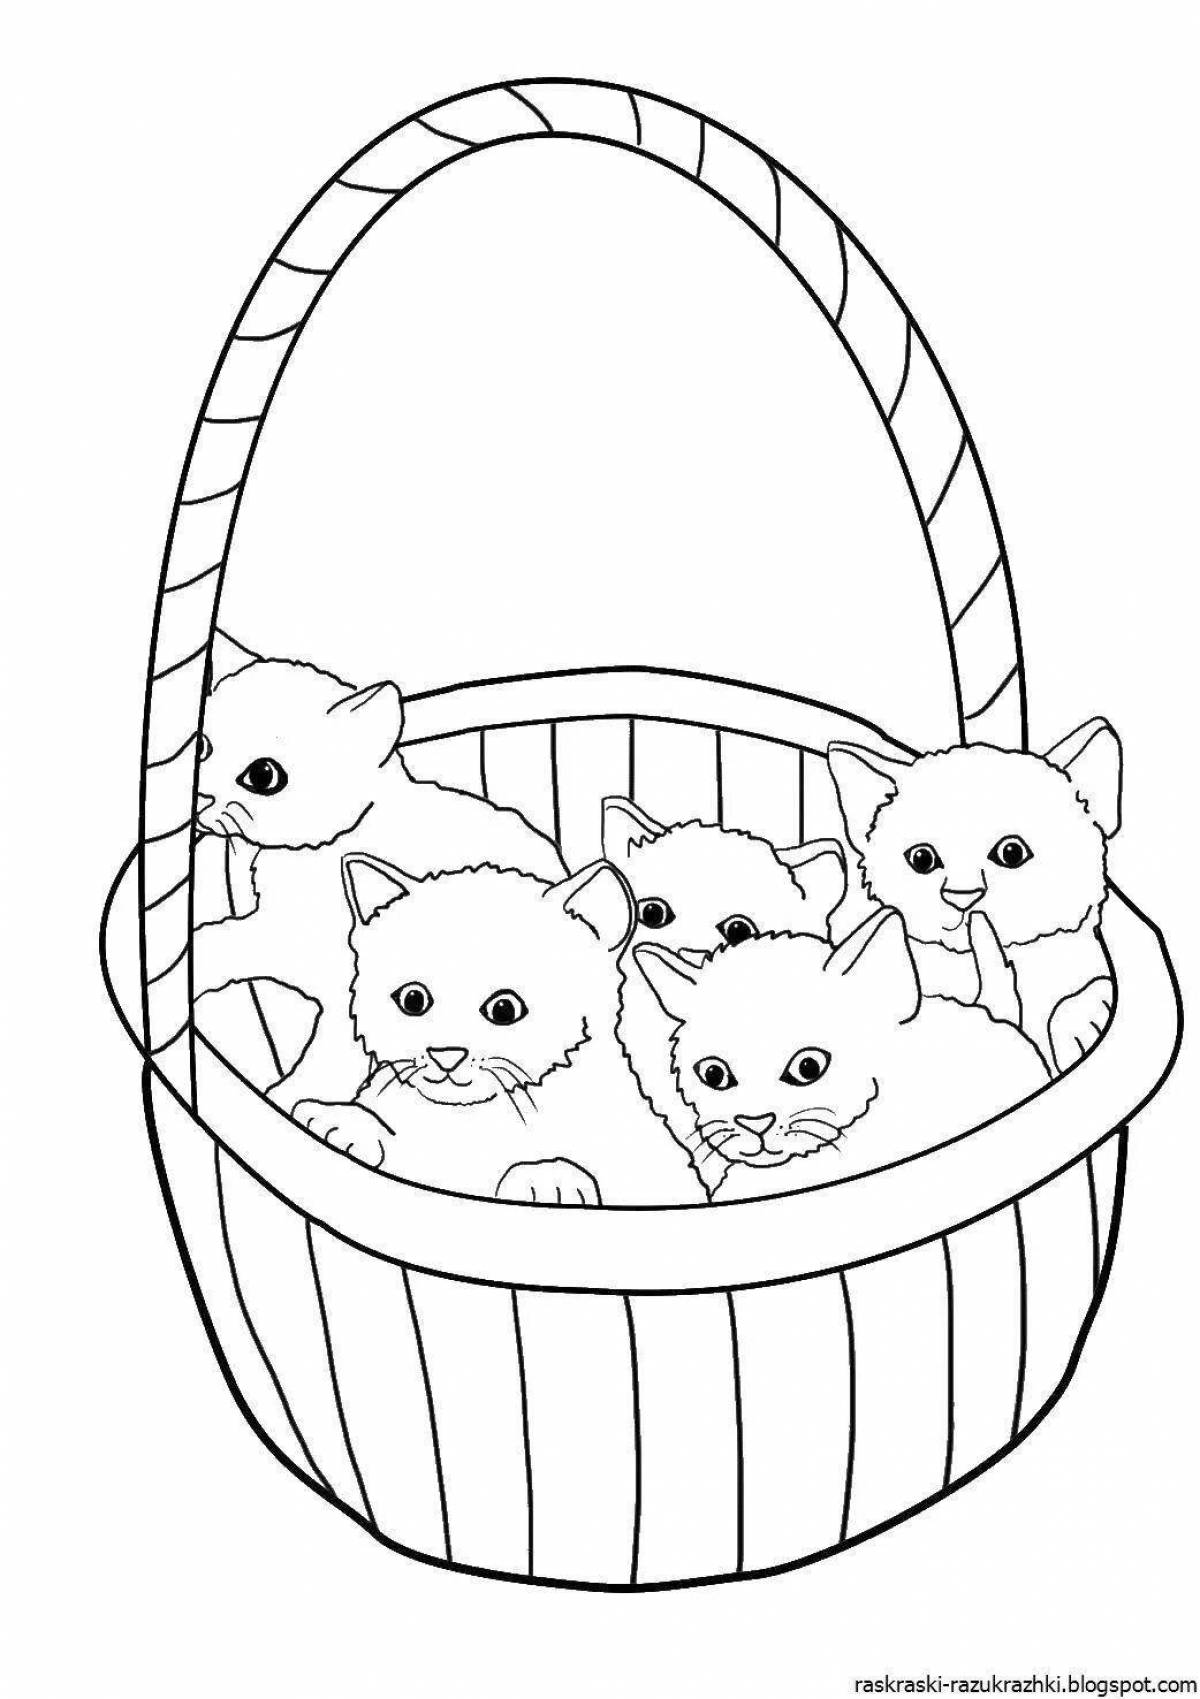 Cat coloring book for children 6-7 years old